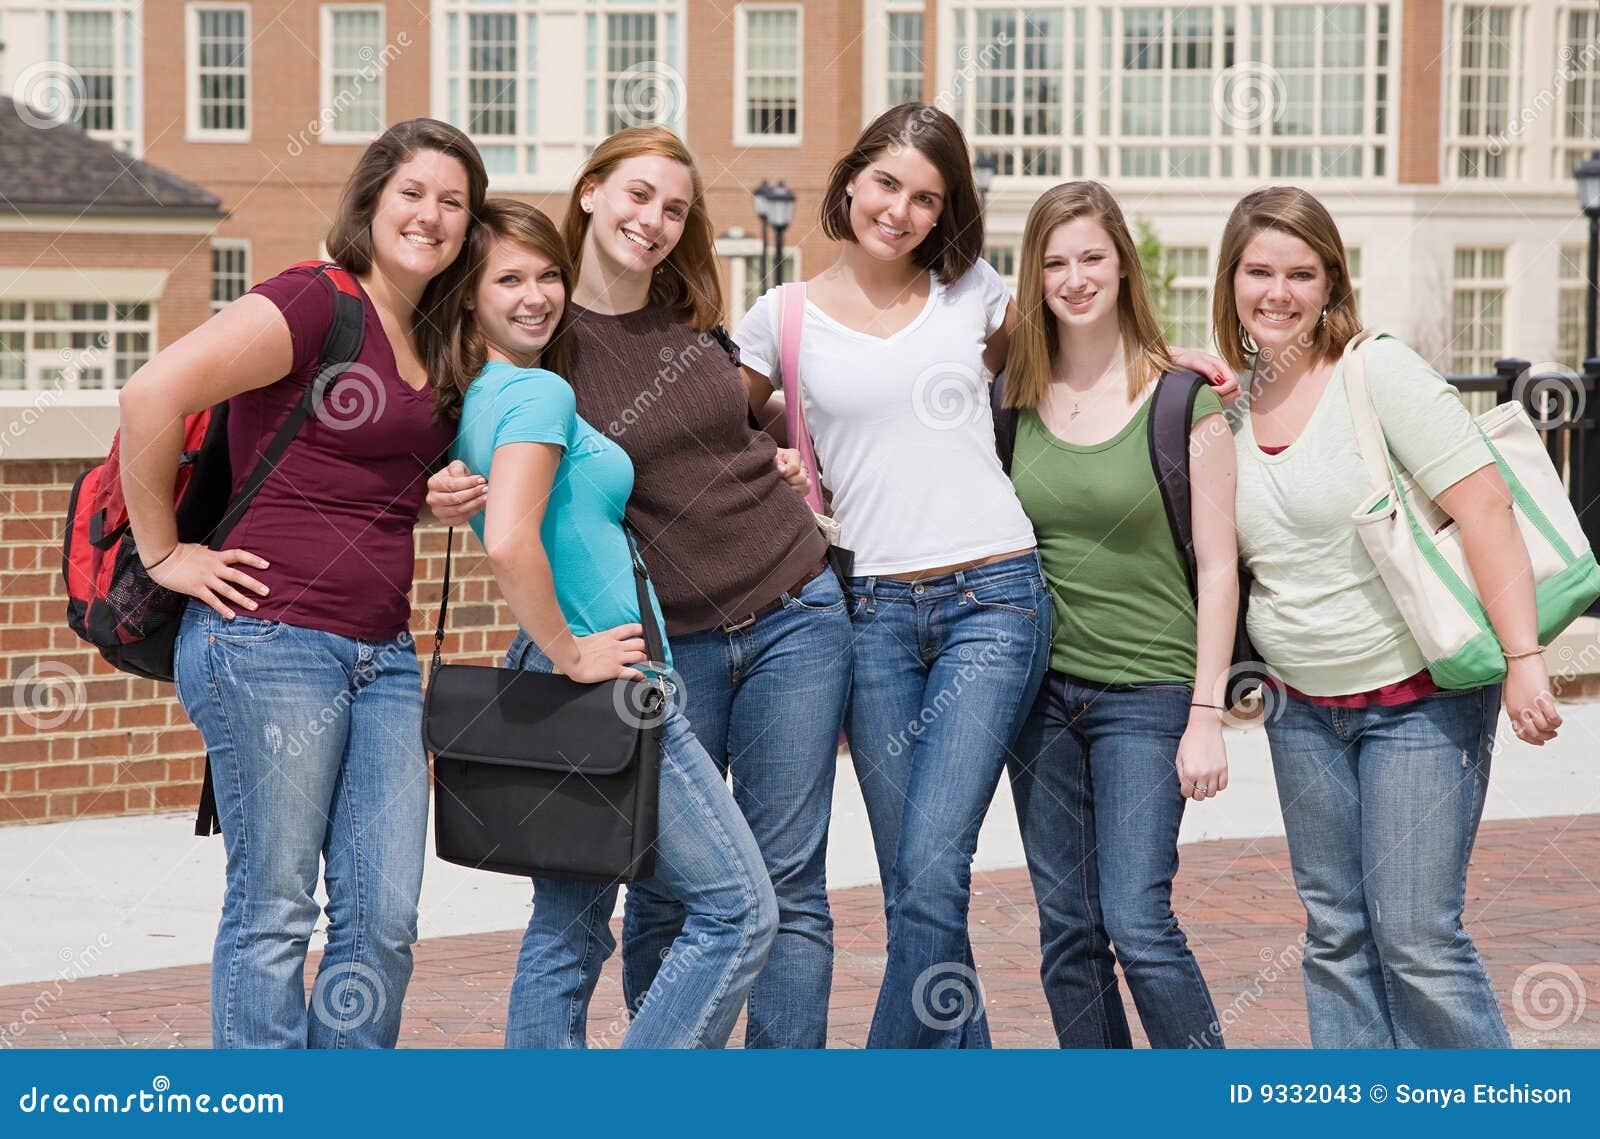 group of college girls